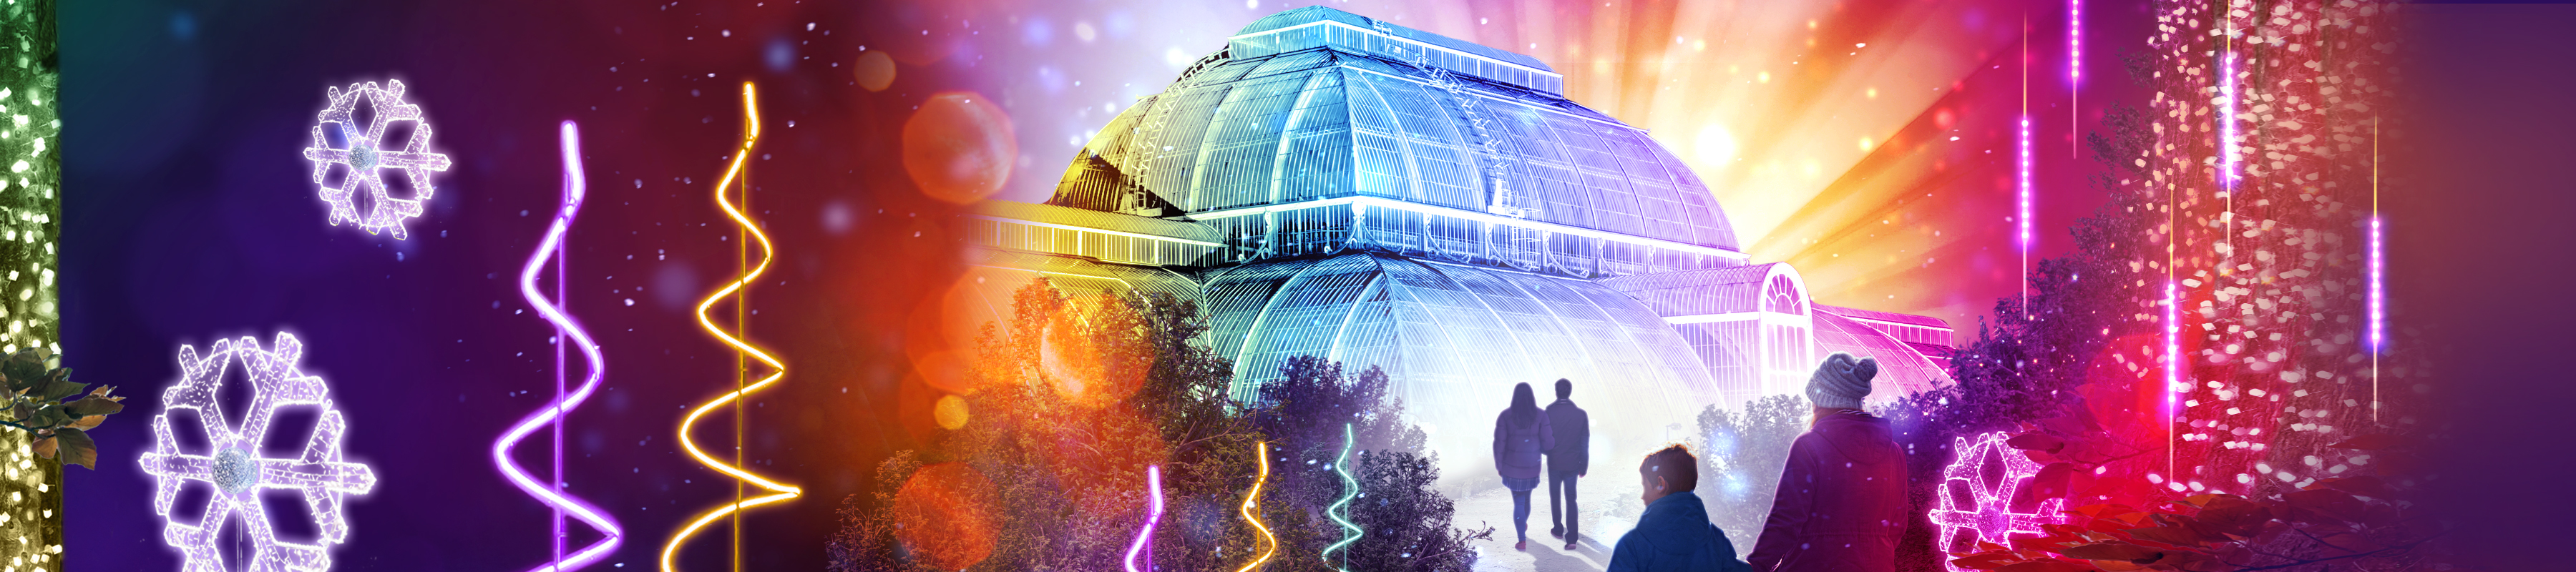 A colourful shot of the palm house at kew during winter christmas time